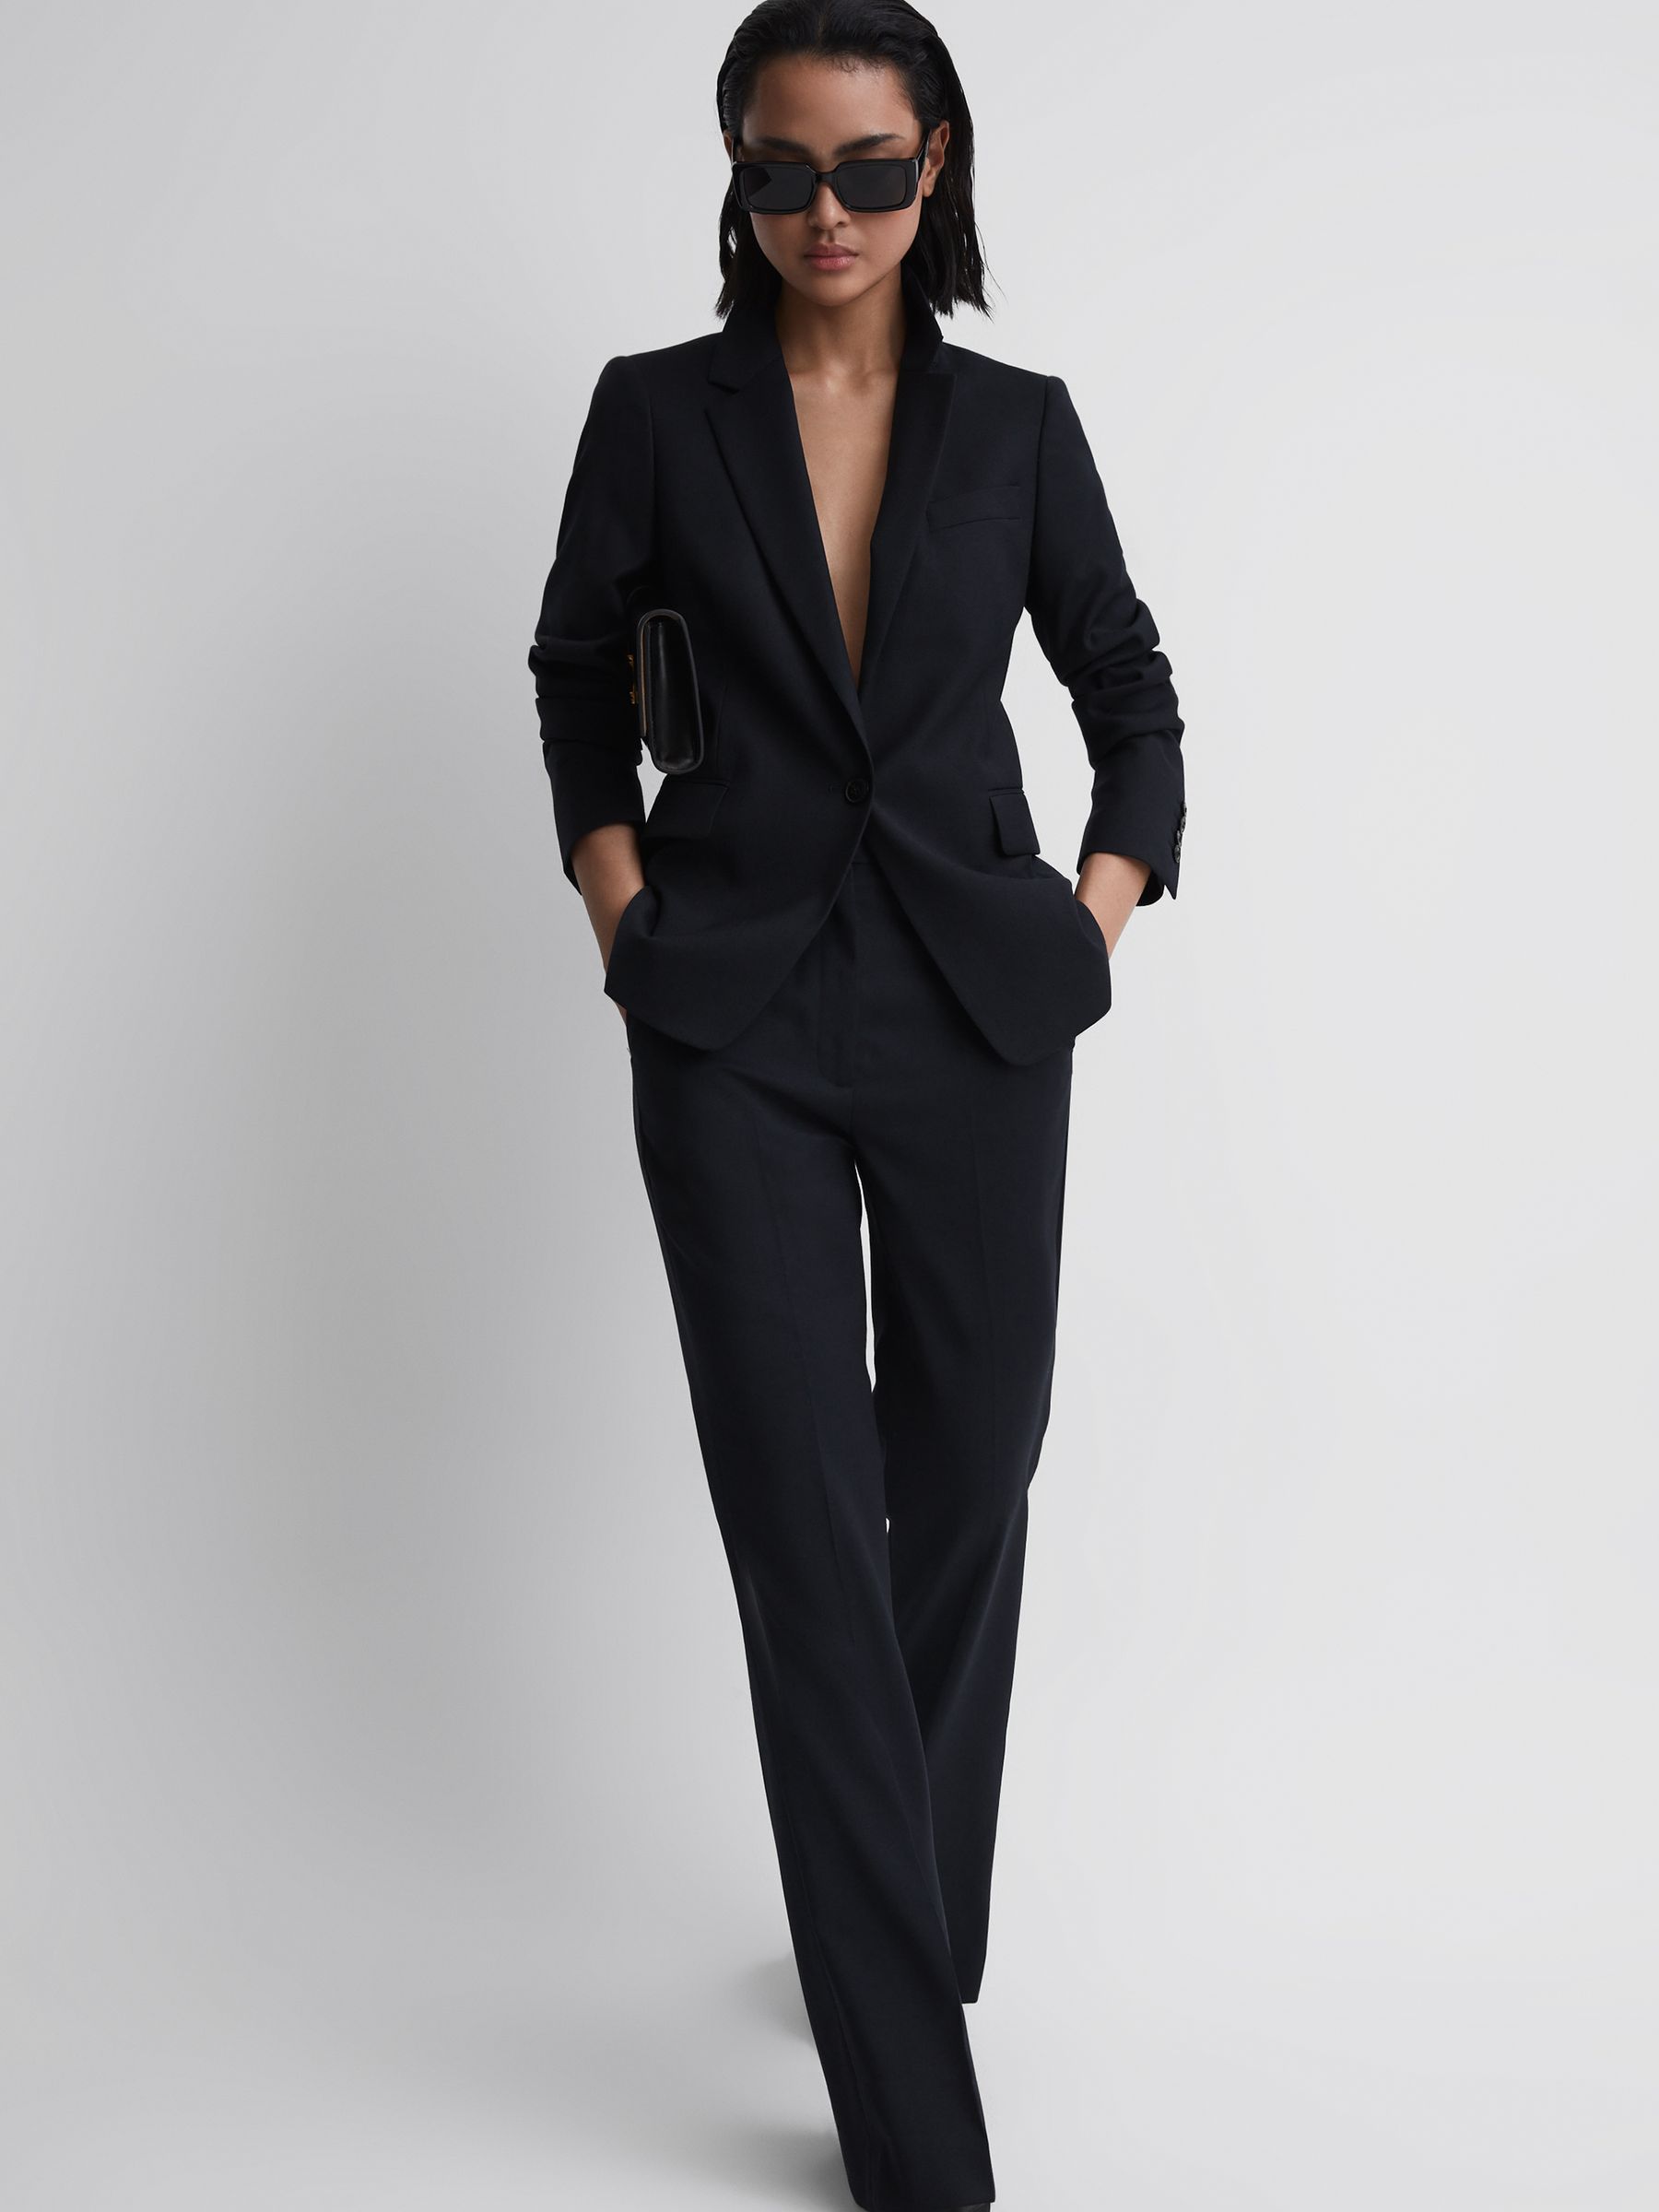 Reiss Haisley Single Breasted Suit Blazer | REISS USA